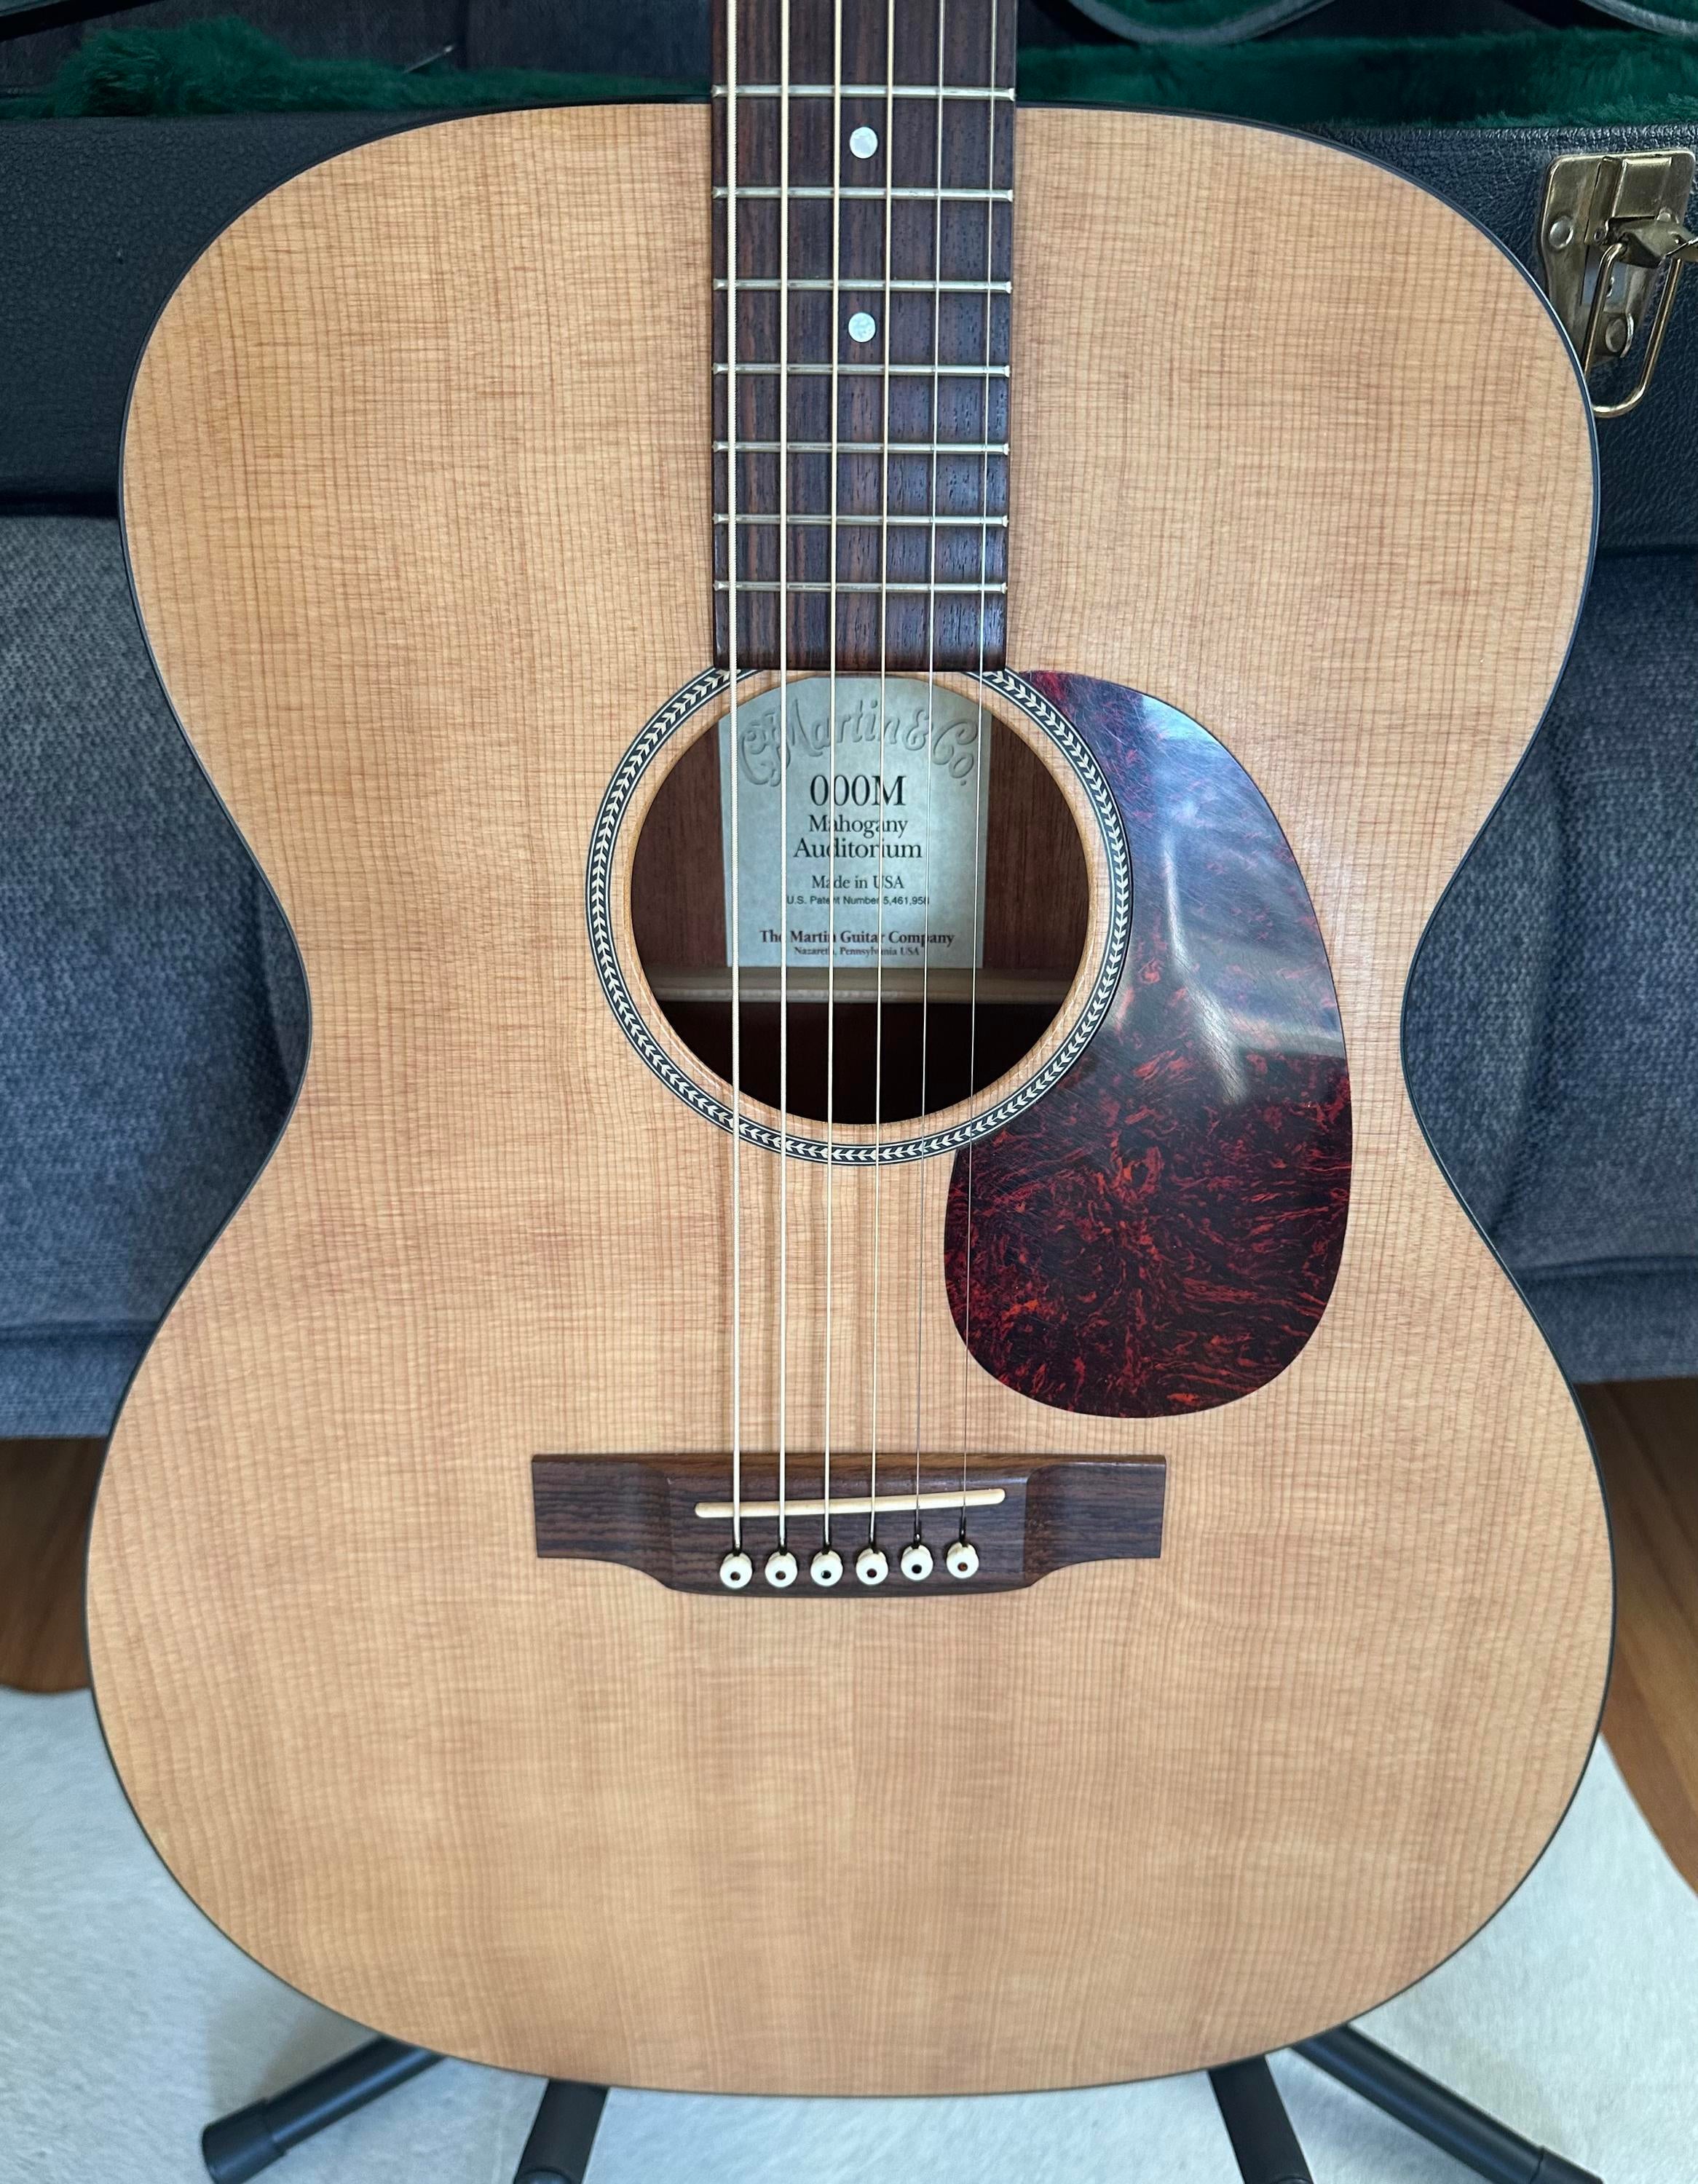 Used Martin 000M 1998 - Natural - Sweetwater's Gear Exchange